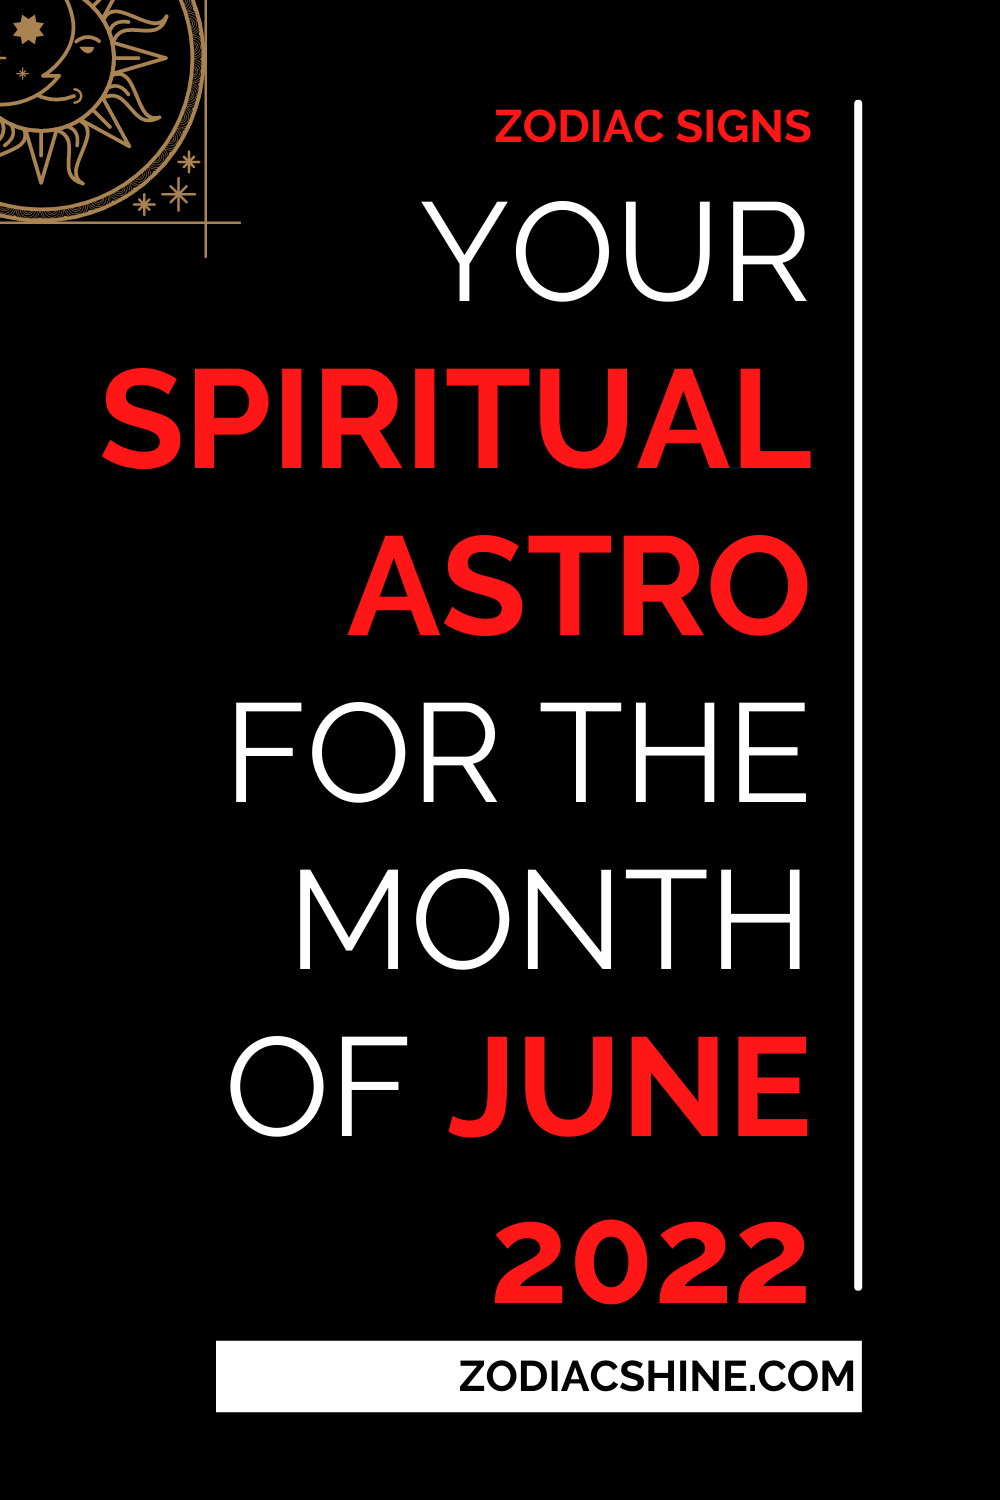 Your Spiritual Astro For The Month Of June 2022